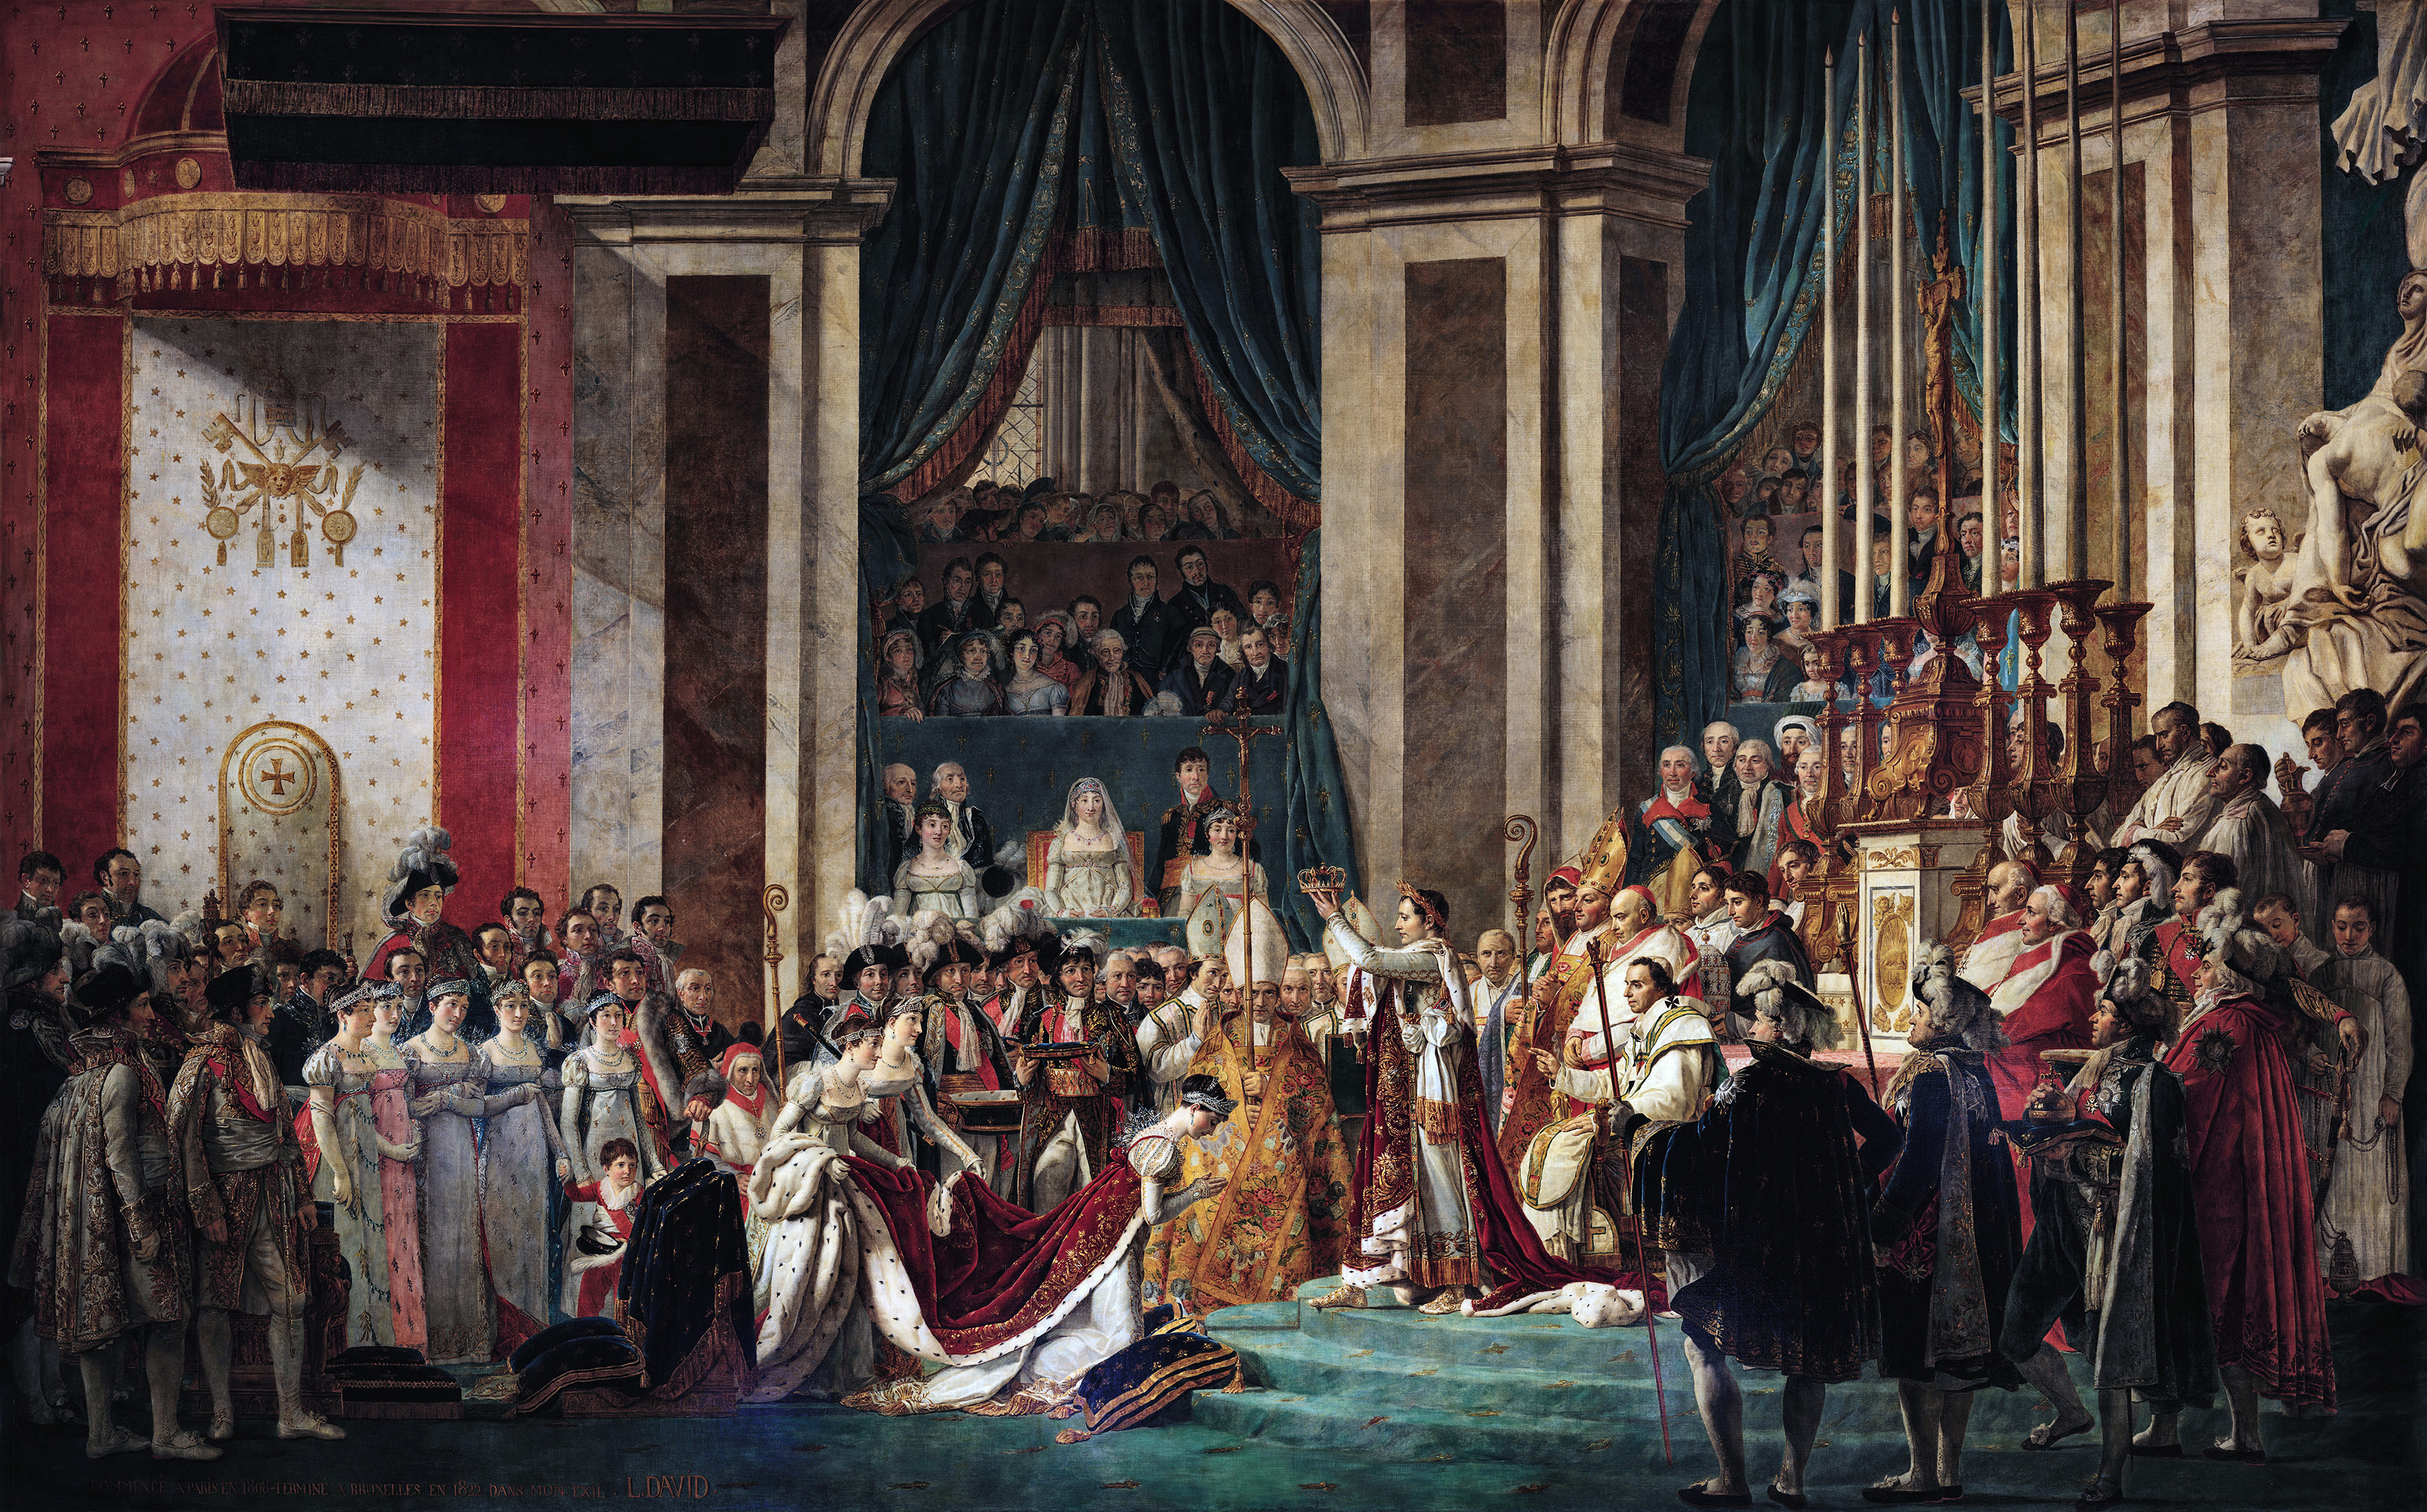 Jacques-Louis David - The Coronation of Napoleon & the Coronation of Josephine at Notre Dame by Jacques-Louis David